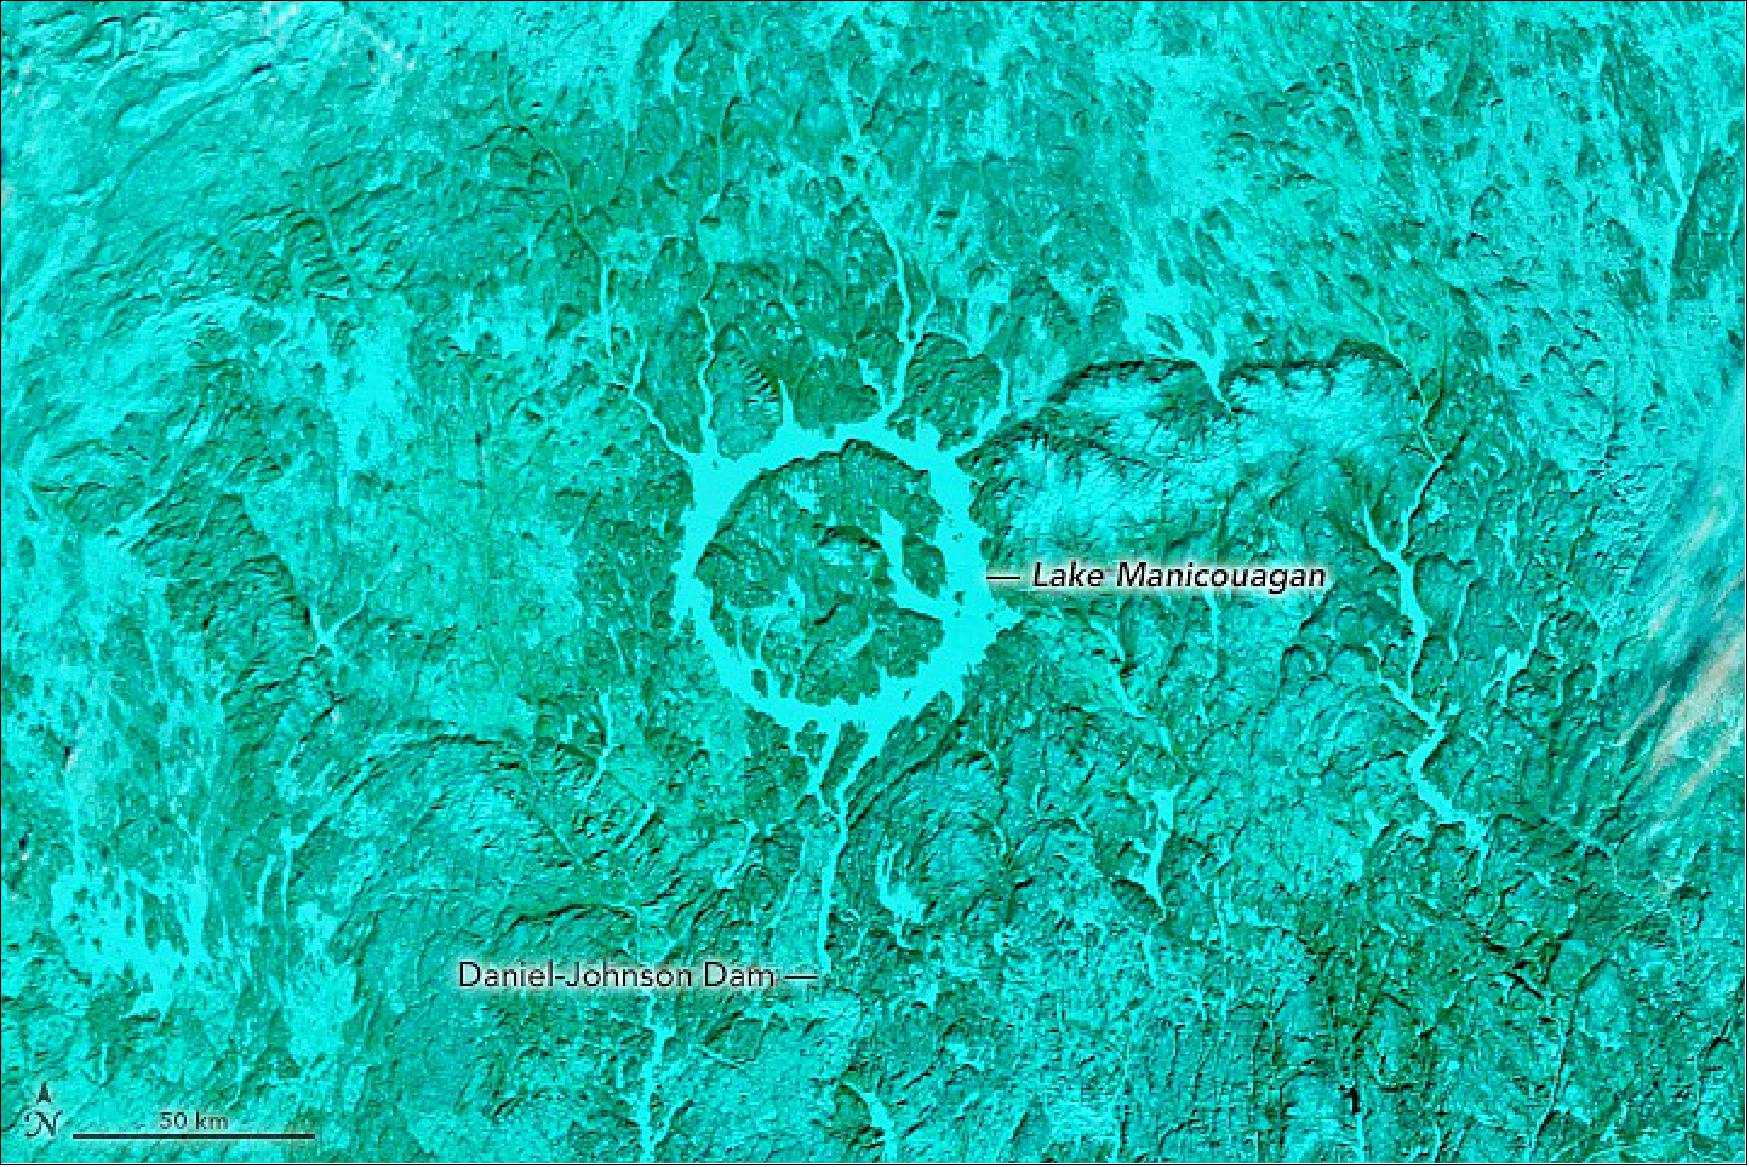 Figure 32: In the false-color image, which uses MODIS bands 7-2-1, snow or ice appears electric blue and vegetation appears green. A blanket of snow covering the surrounding vegetation gives it a greenish-blue color (image credit: NASA Earth Observatory)